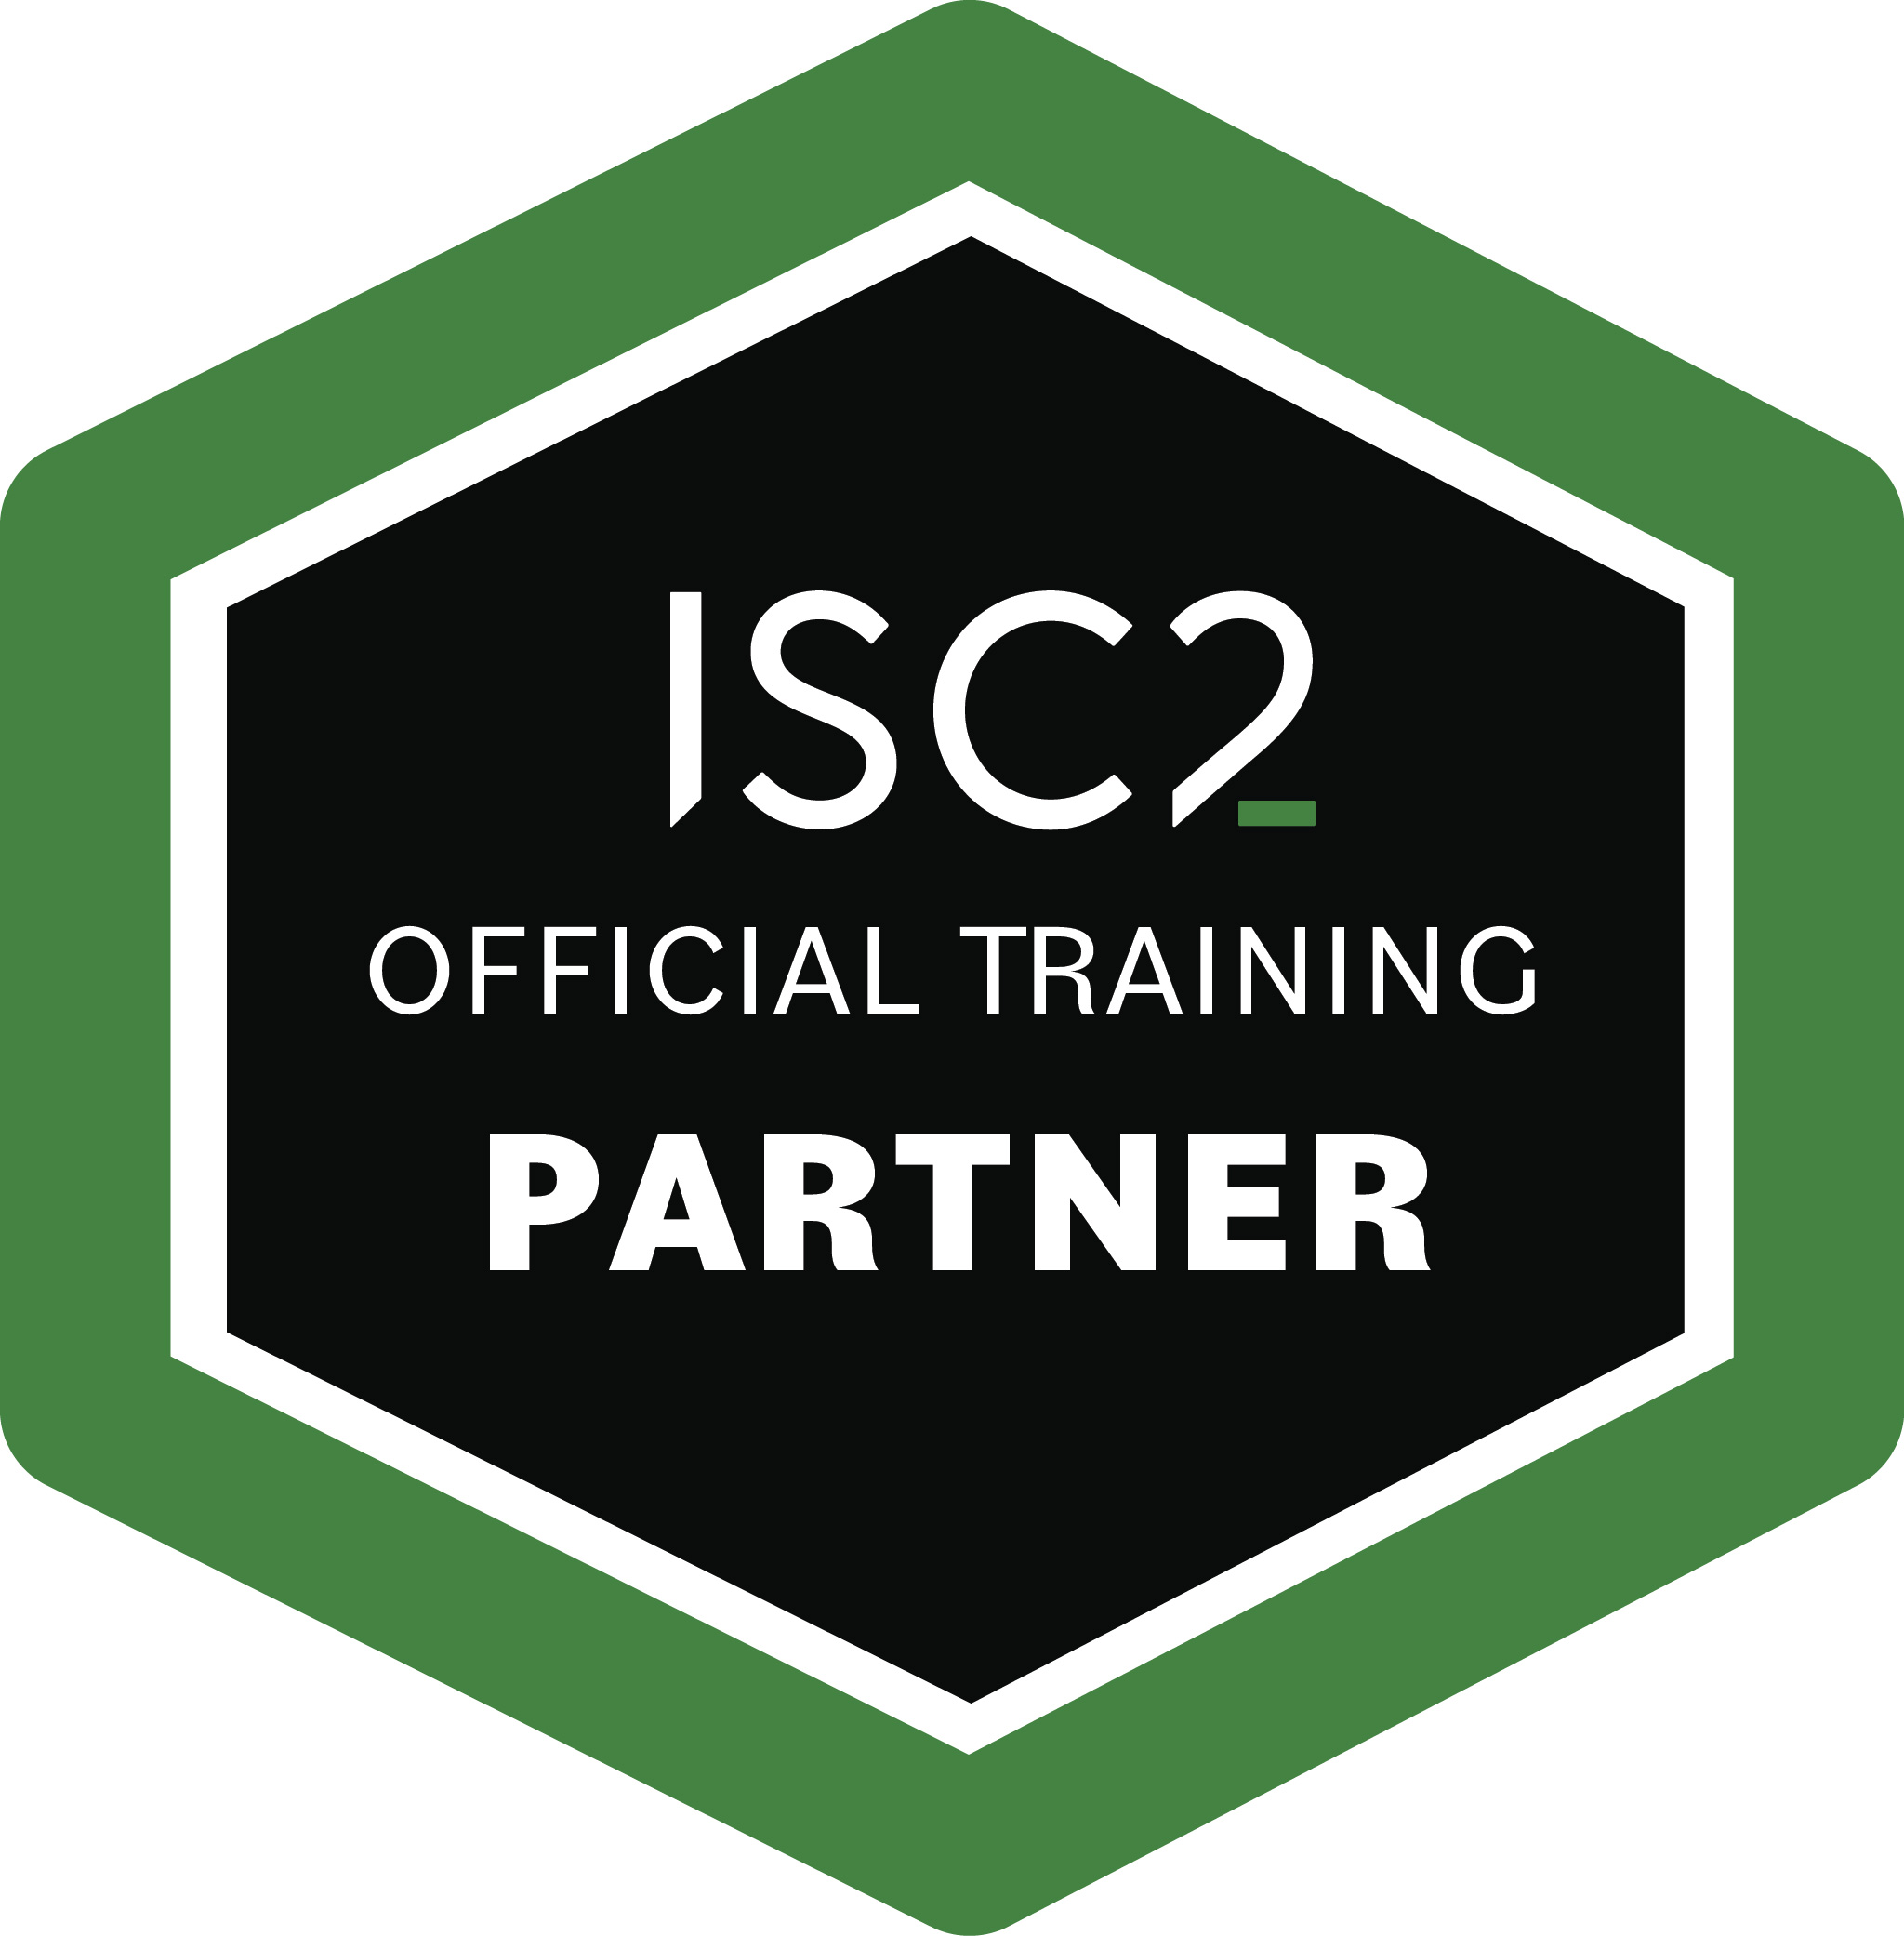 Cyber Quarter Joins ISC2 Official Training Partner Programme to Advance Cyber Security Training